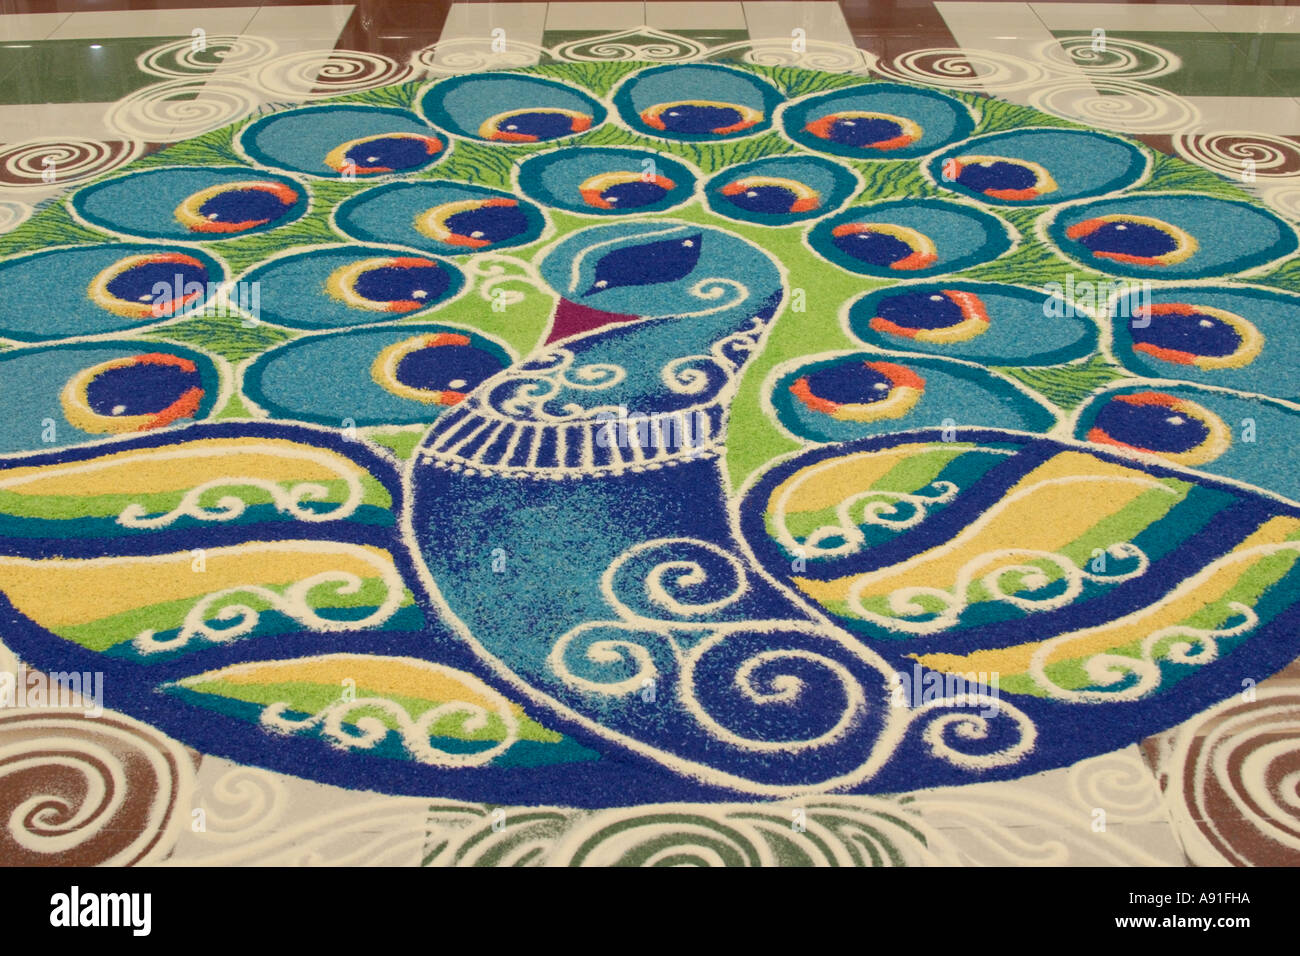 kolam - decorative artwork drawn on floor by south indians using rice Stock Photo